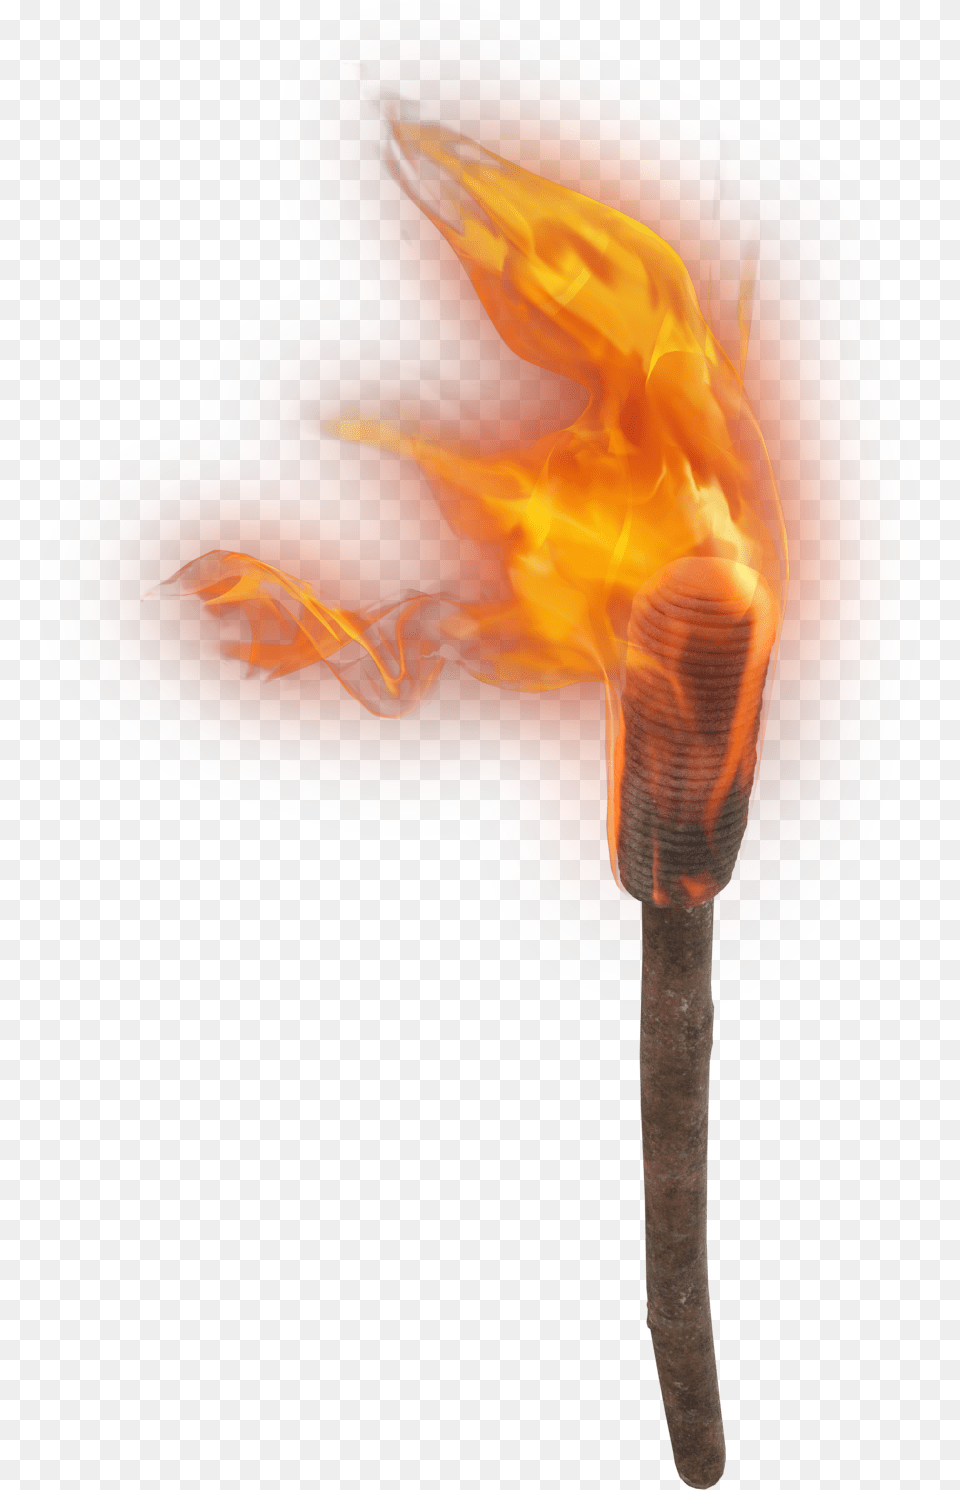 Hand Torch Image For Download Fire On A Stick, Light, Flame, Blade, Dagger Free Transparent Png